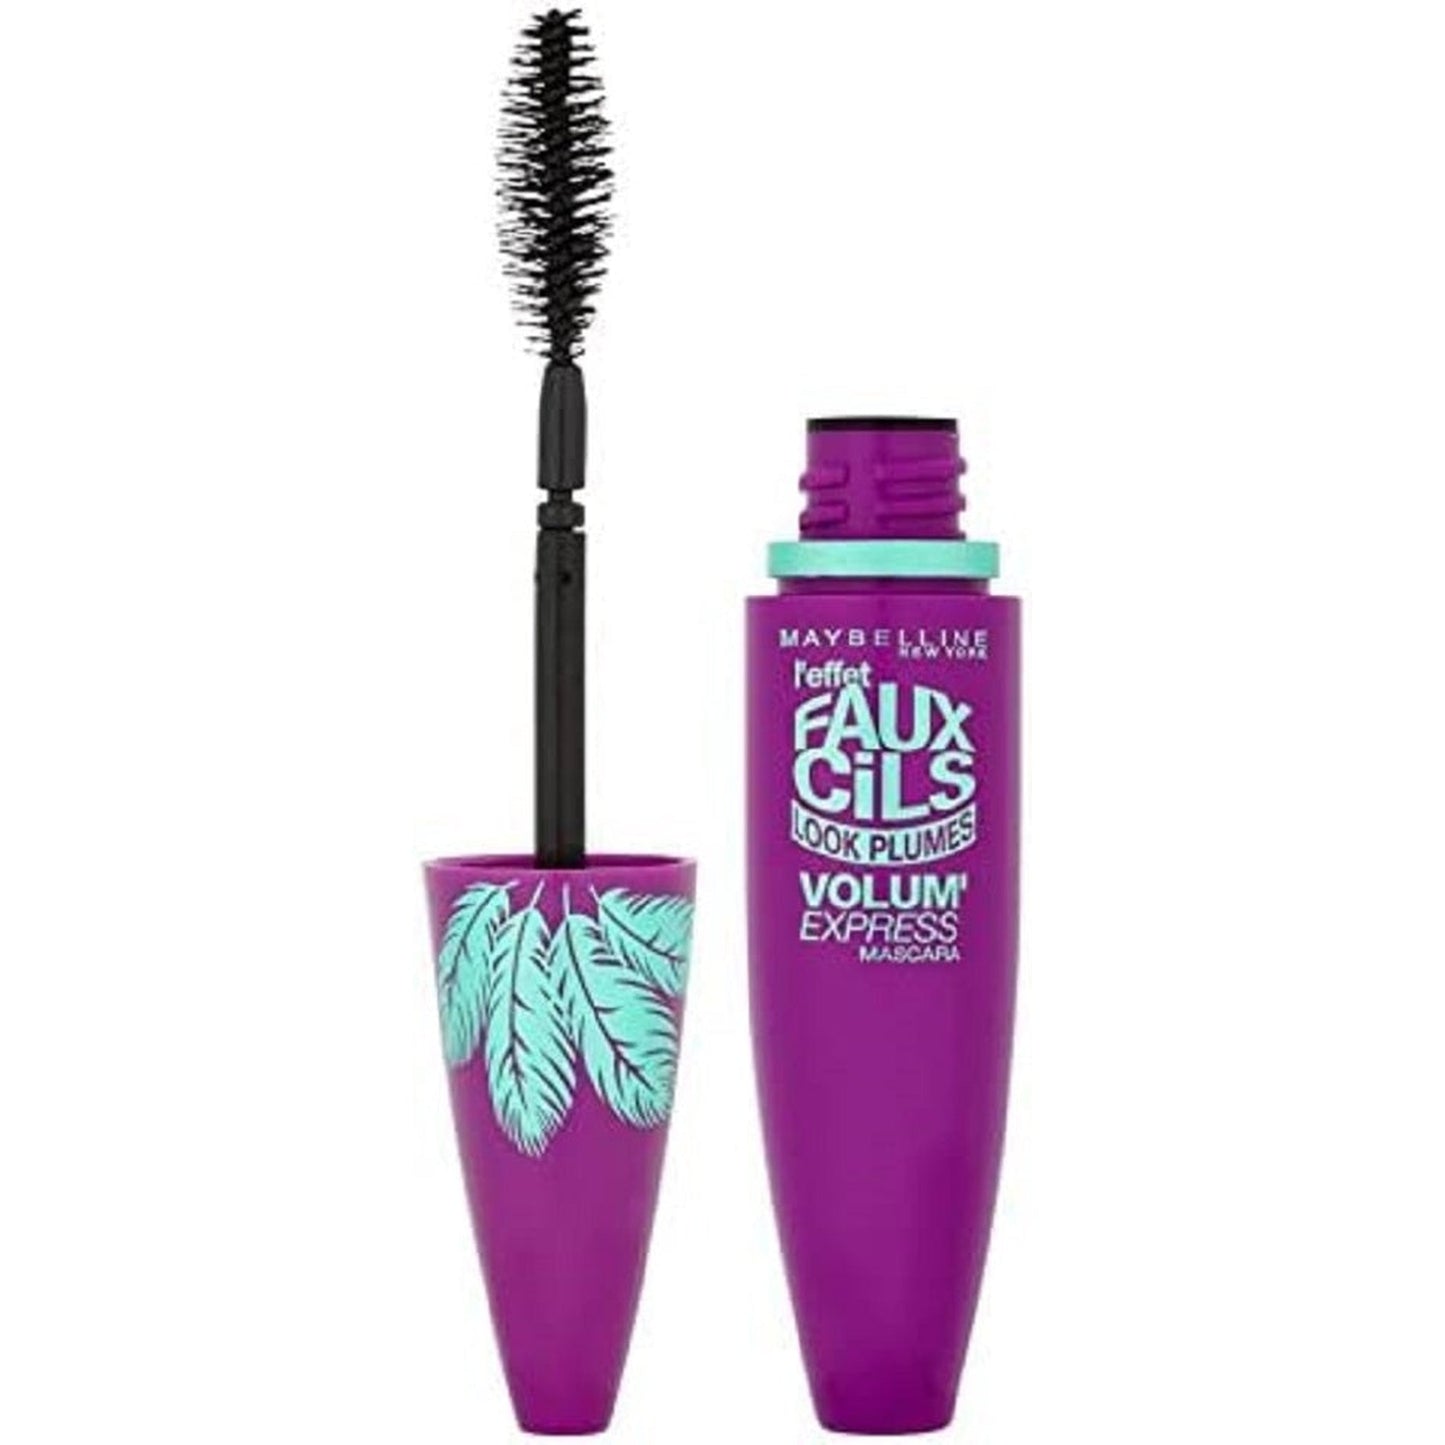 Maybelline The Falsies Look Plumes Volum' Express Mascara Glam Black-Maybelline-BeautyNmakeup.co.uk